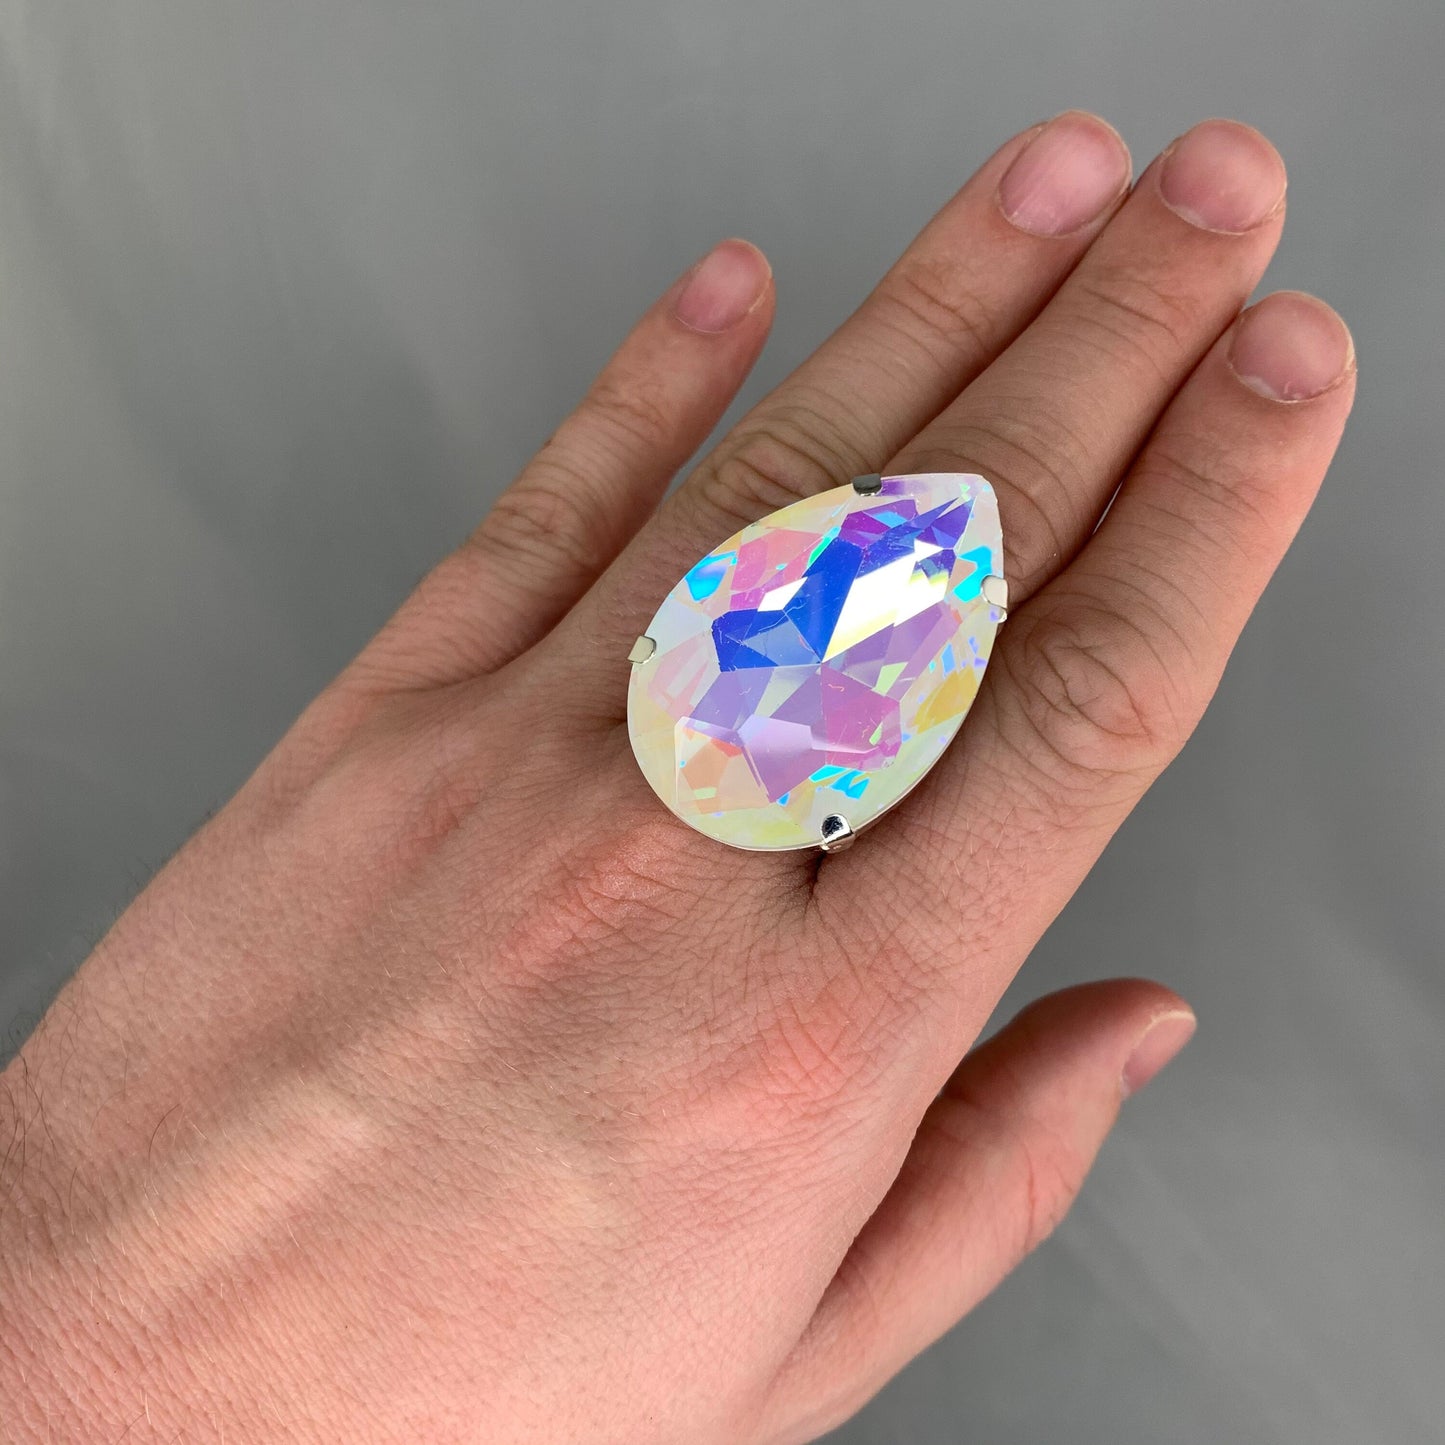 XL Pearlescent Multicolour Crystal Teardrop Ring / Cocktail Dress Ring / Adjustable back / Gift